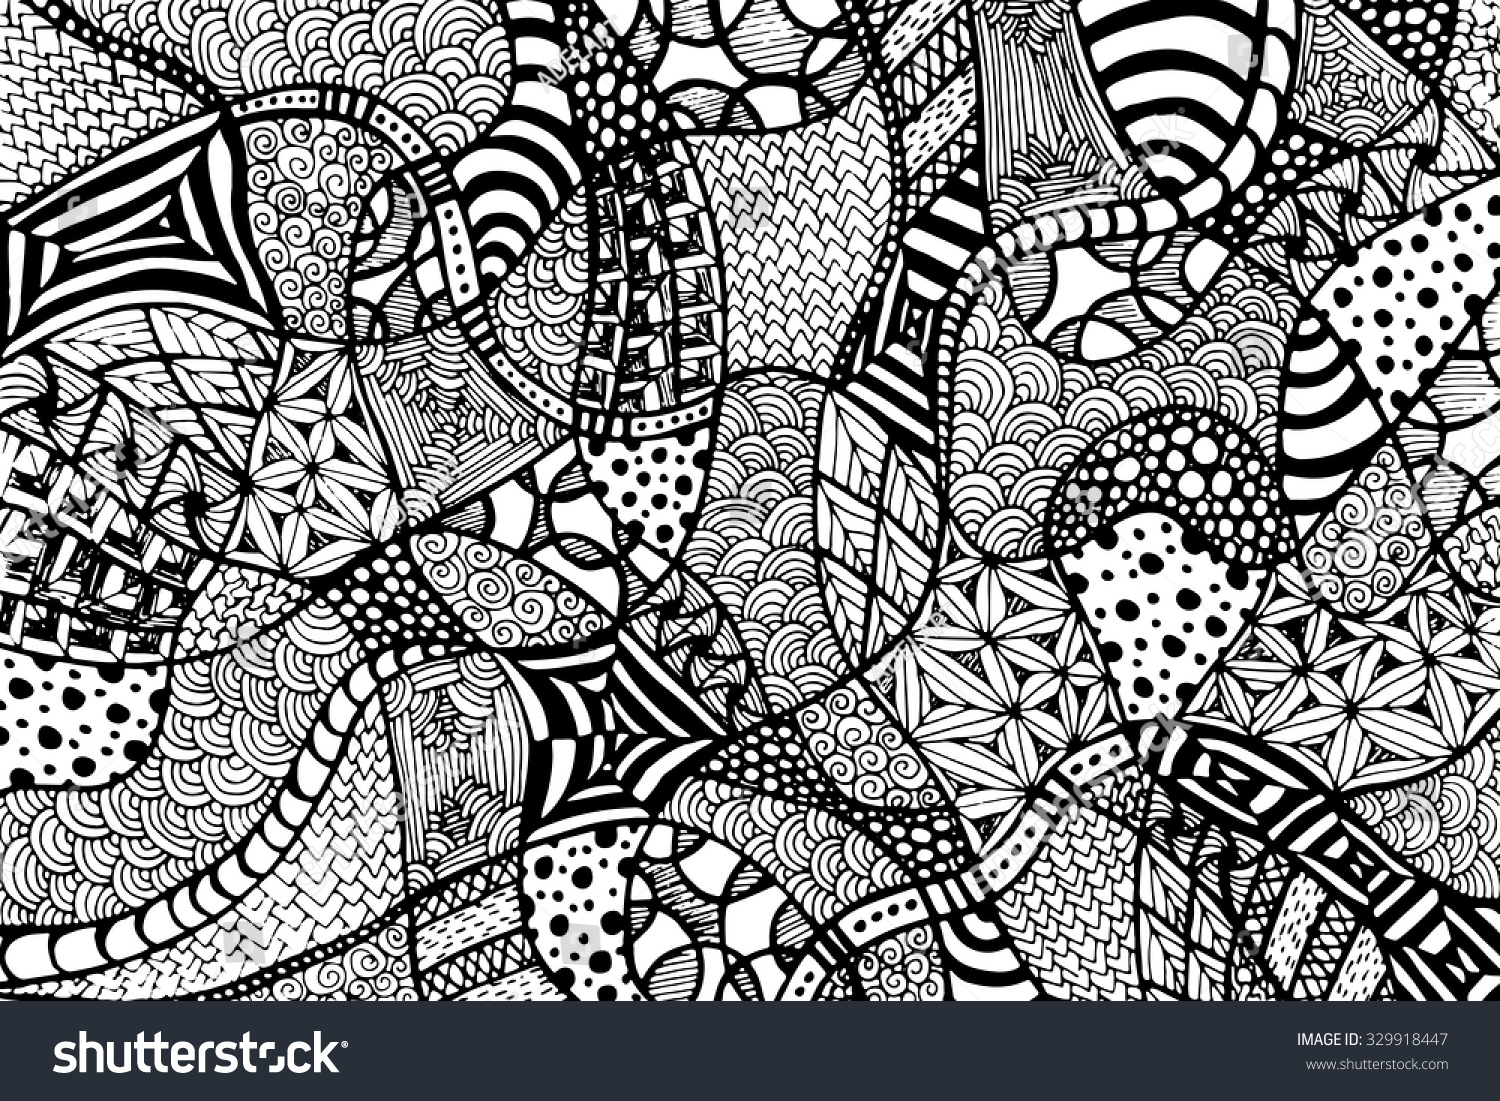 Zentangle Background With A Lot Of Unique Elements. Totally Hand Drawn ...